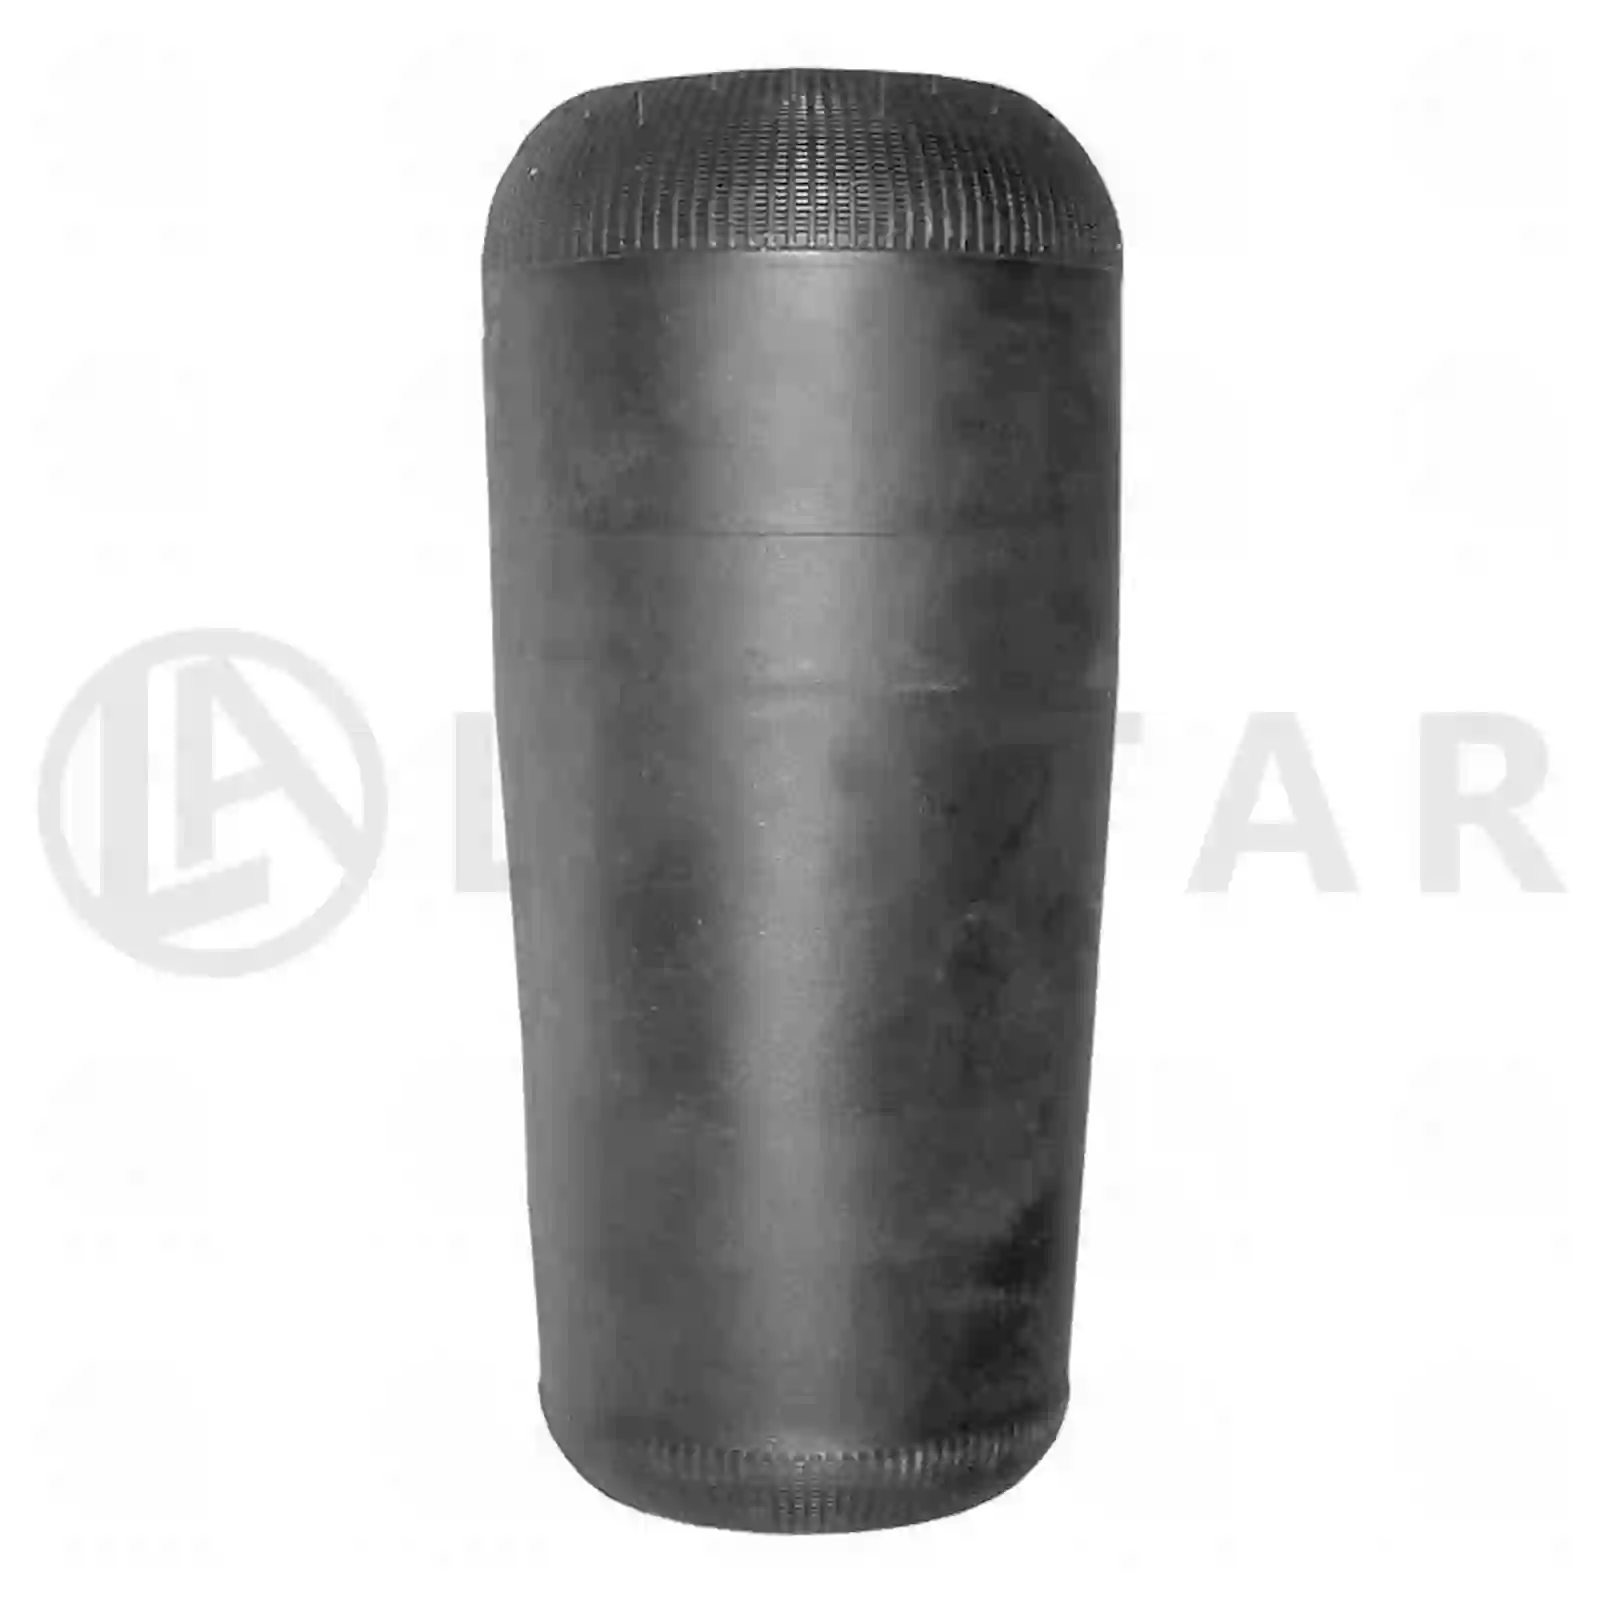 Air spring, without piston, 77729099, 81436010071, 81436010072, 81436010110, 81436010128, 81436010137, 83436010071, MLF7088, 1082085 ||  77729099 Lastar Spare Part | Truck Spare Parts, Auotomotive Spare Parts Air spring, without piston, 77729099, 81436010071, 81436010072, 81436010110, 81436010128, 81436010137, 83436010071, MLF7088, 1082085 ||  77729099 Lastar Spare Part | Truck Spare Parts, Auotomotive Spare Parts